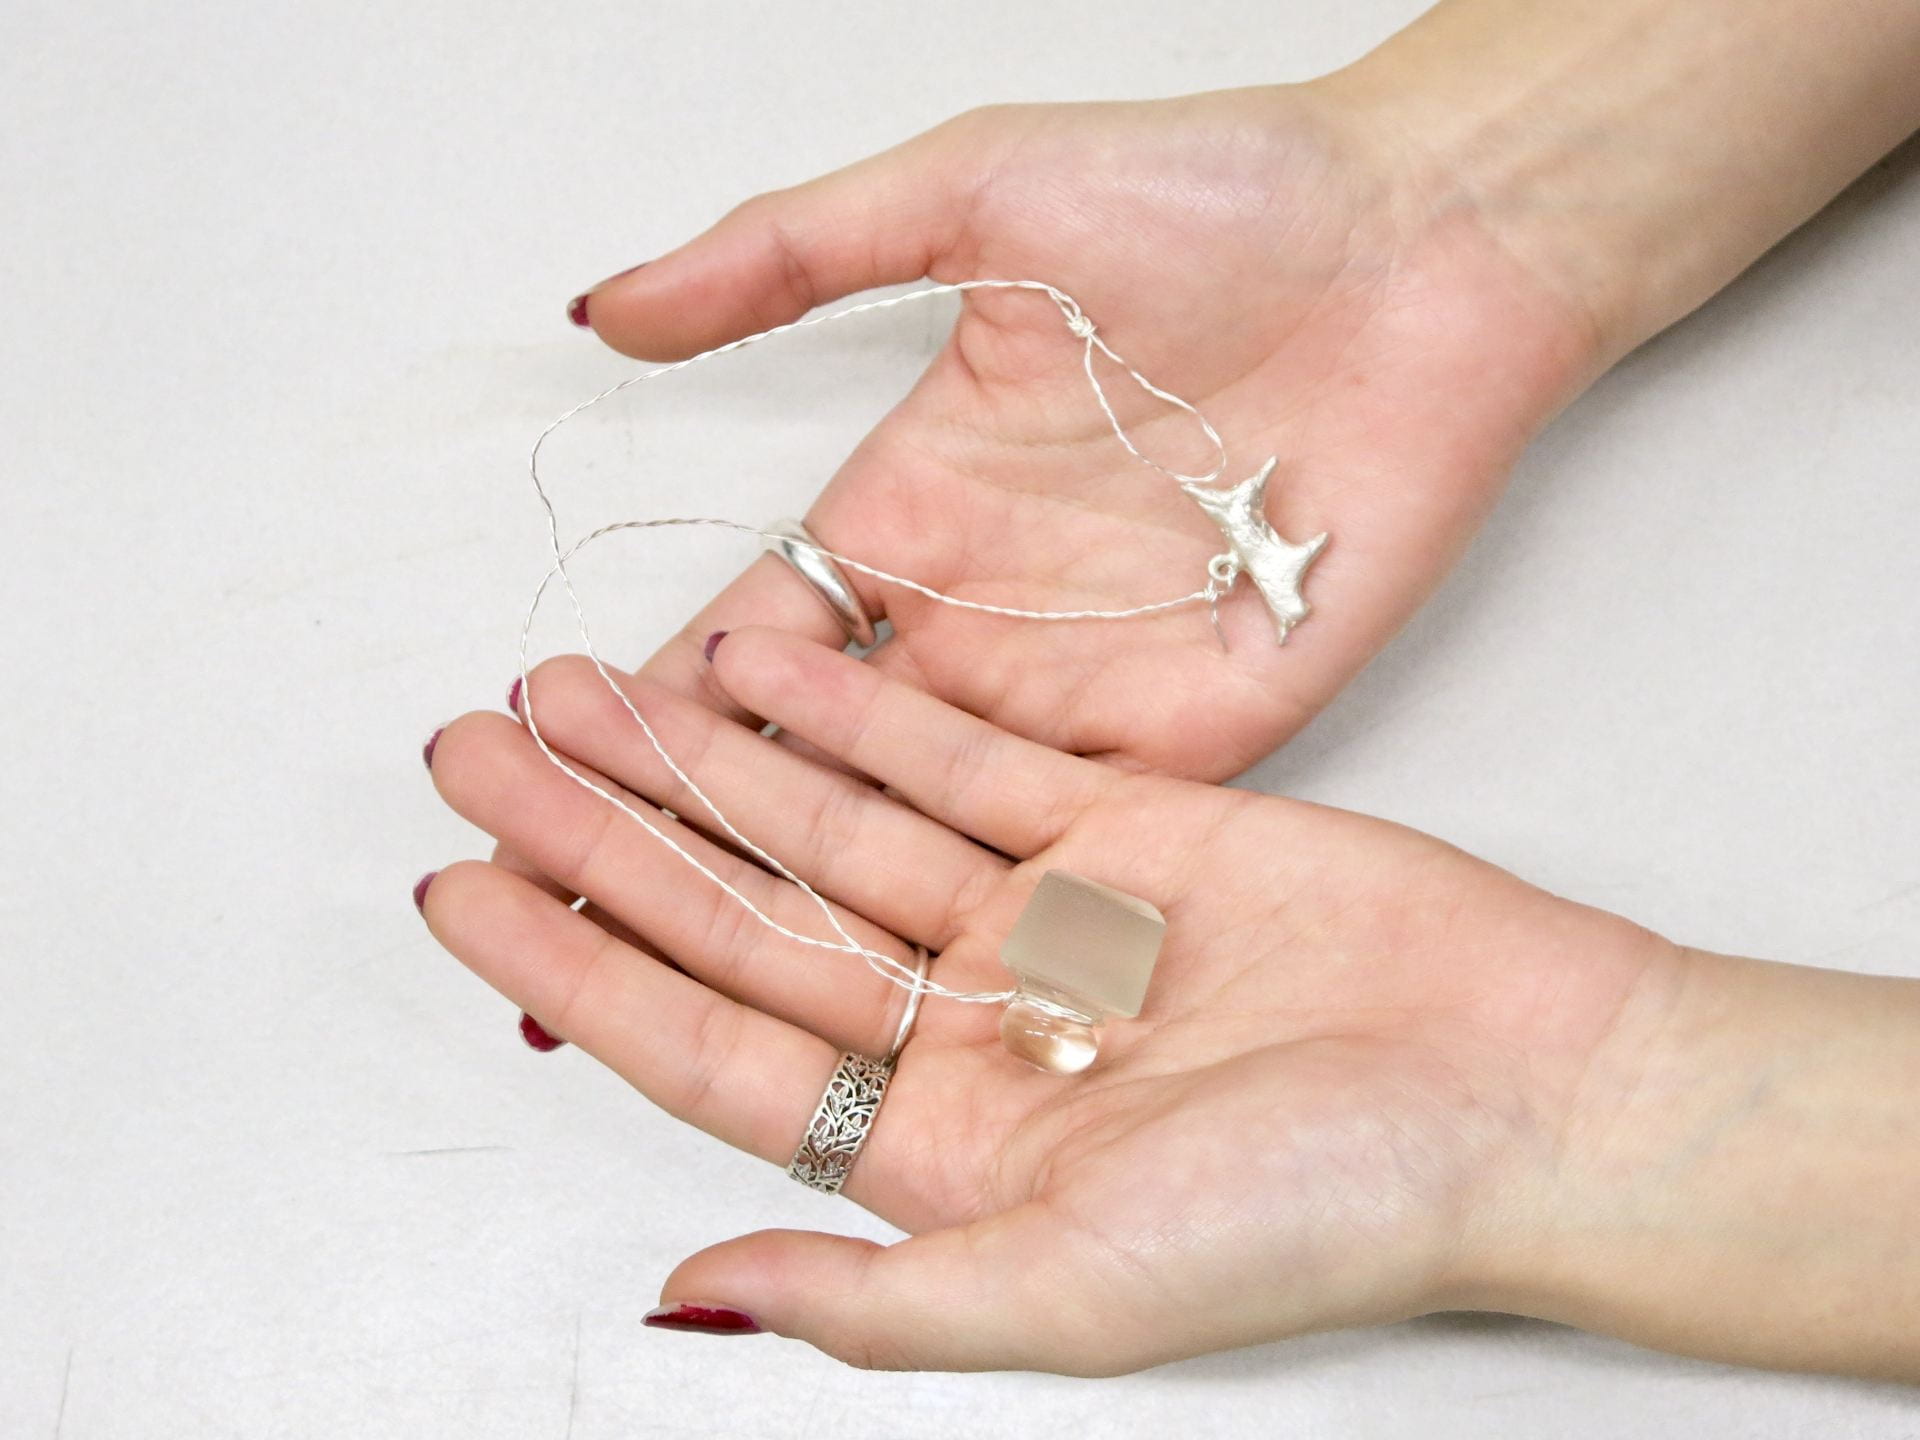 Hands holding a silver wire necklace